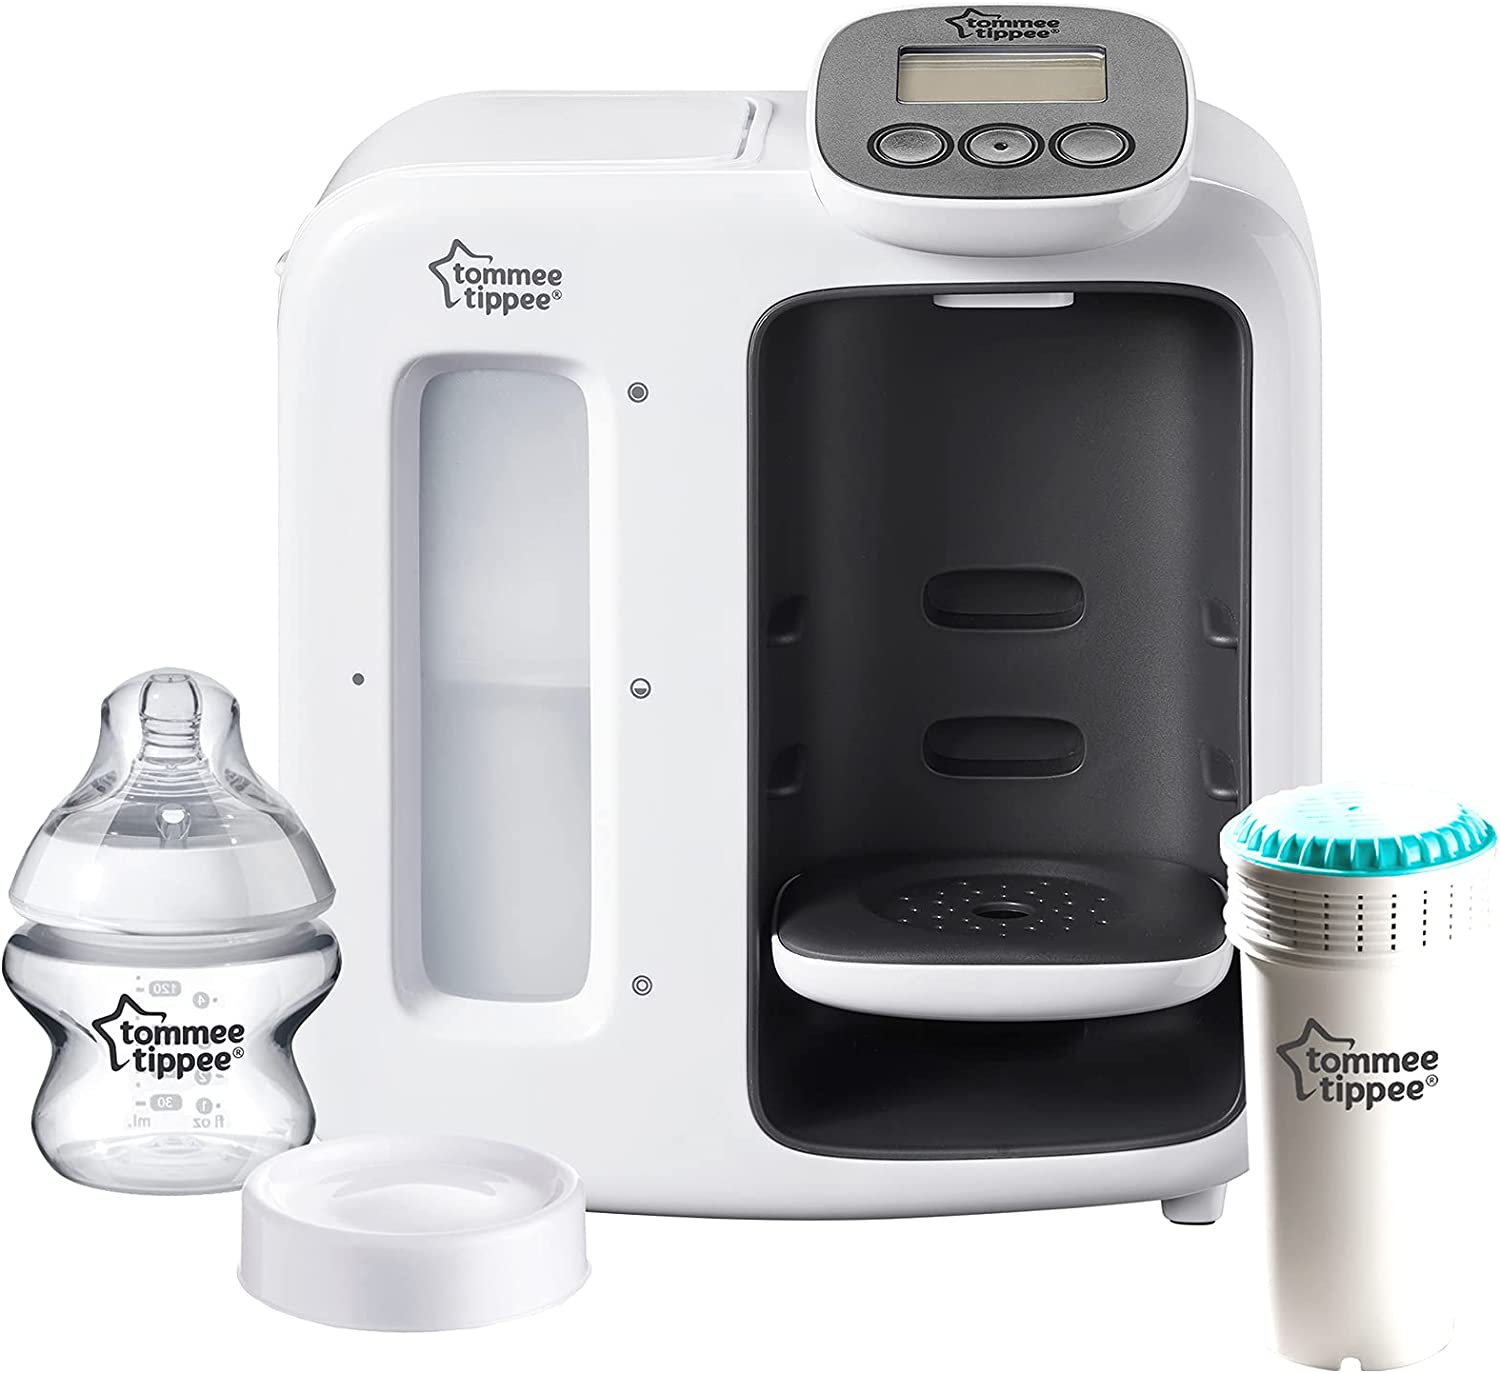 Tommee Tippee Perfect Prep Day and Night Machine Instant and Fast Baby Bottle Maker